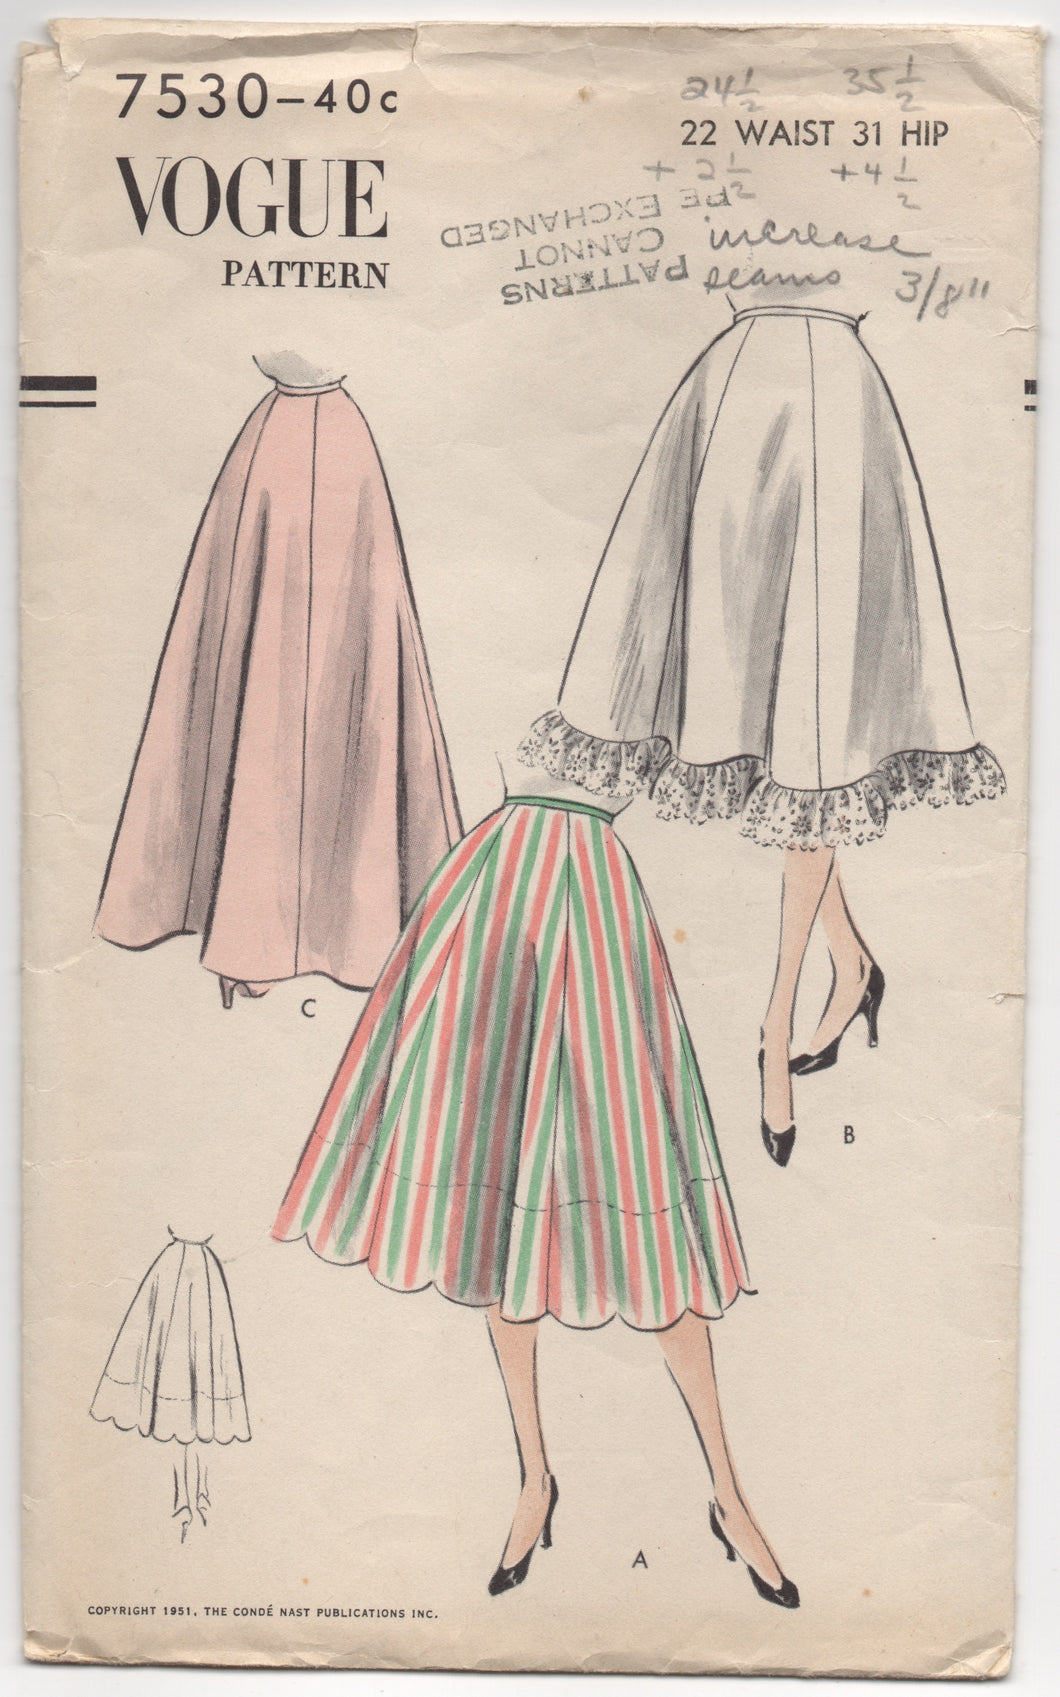 1950’s Vogue Petticoat in Two lengths or scallops - Waist 22” - No. 7530